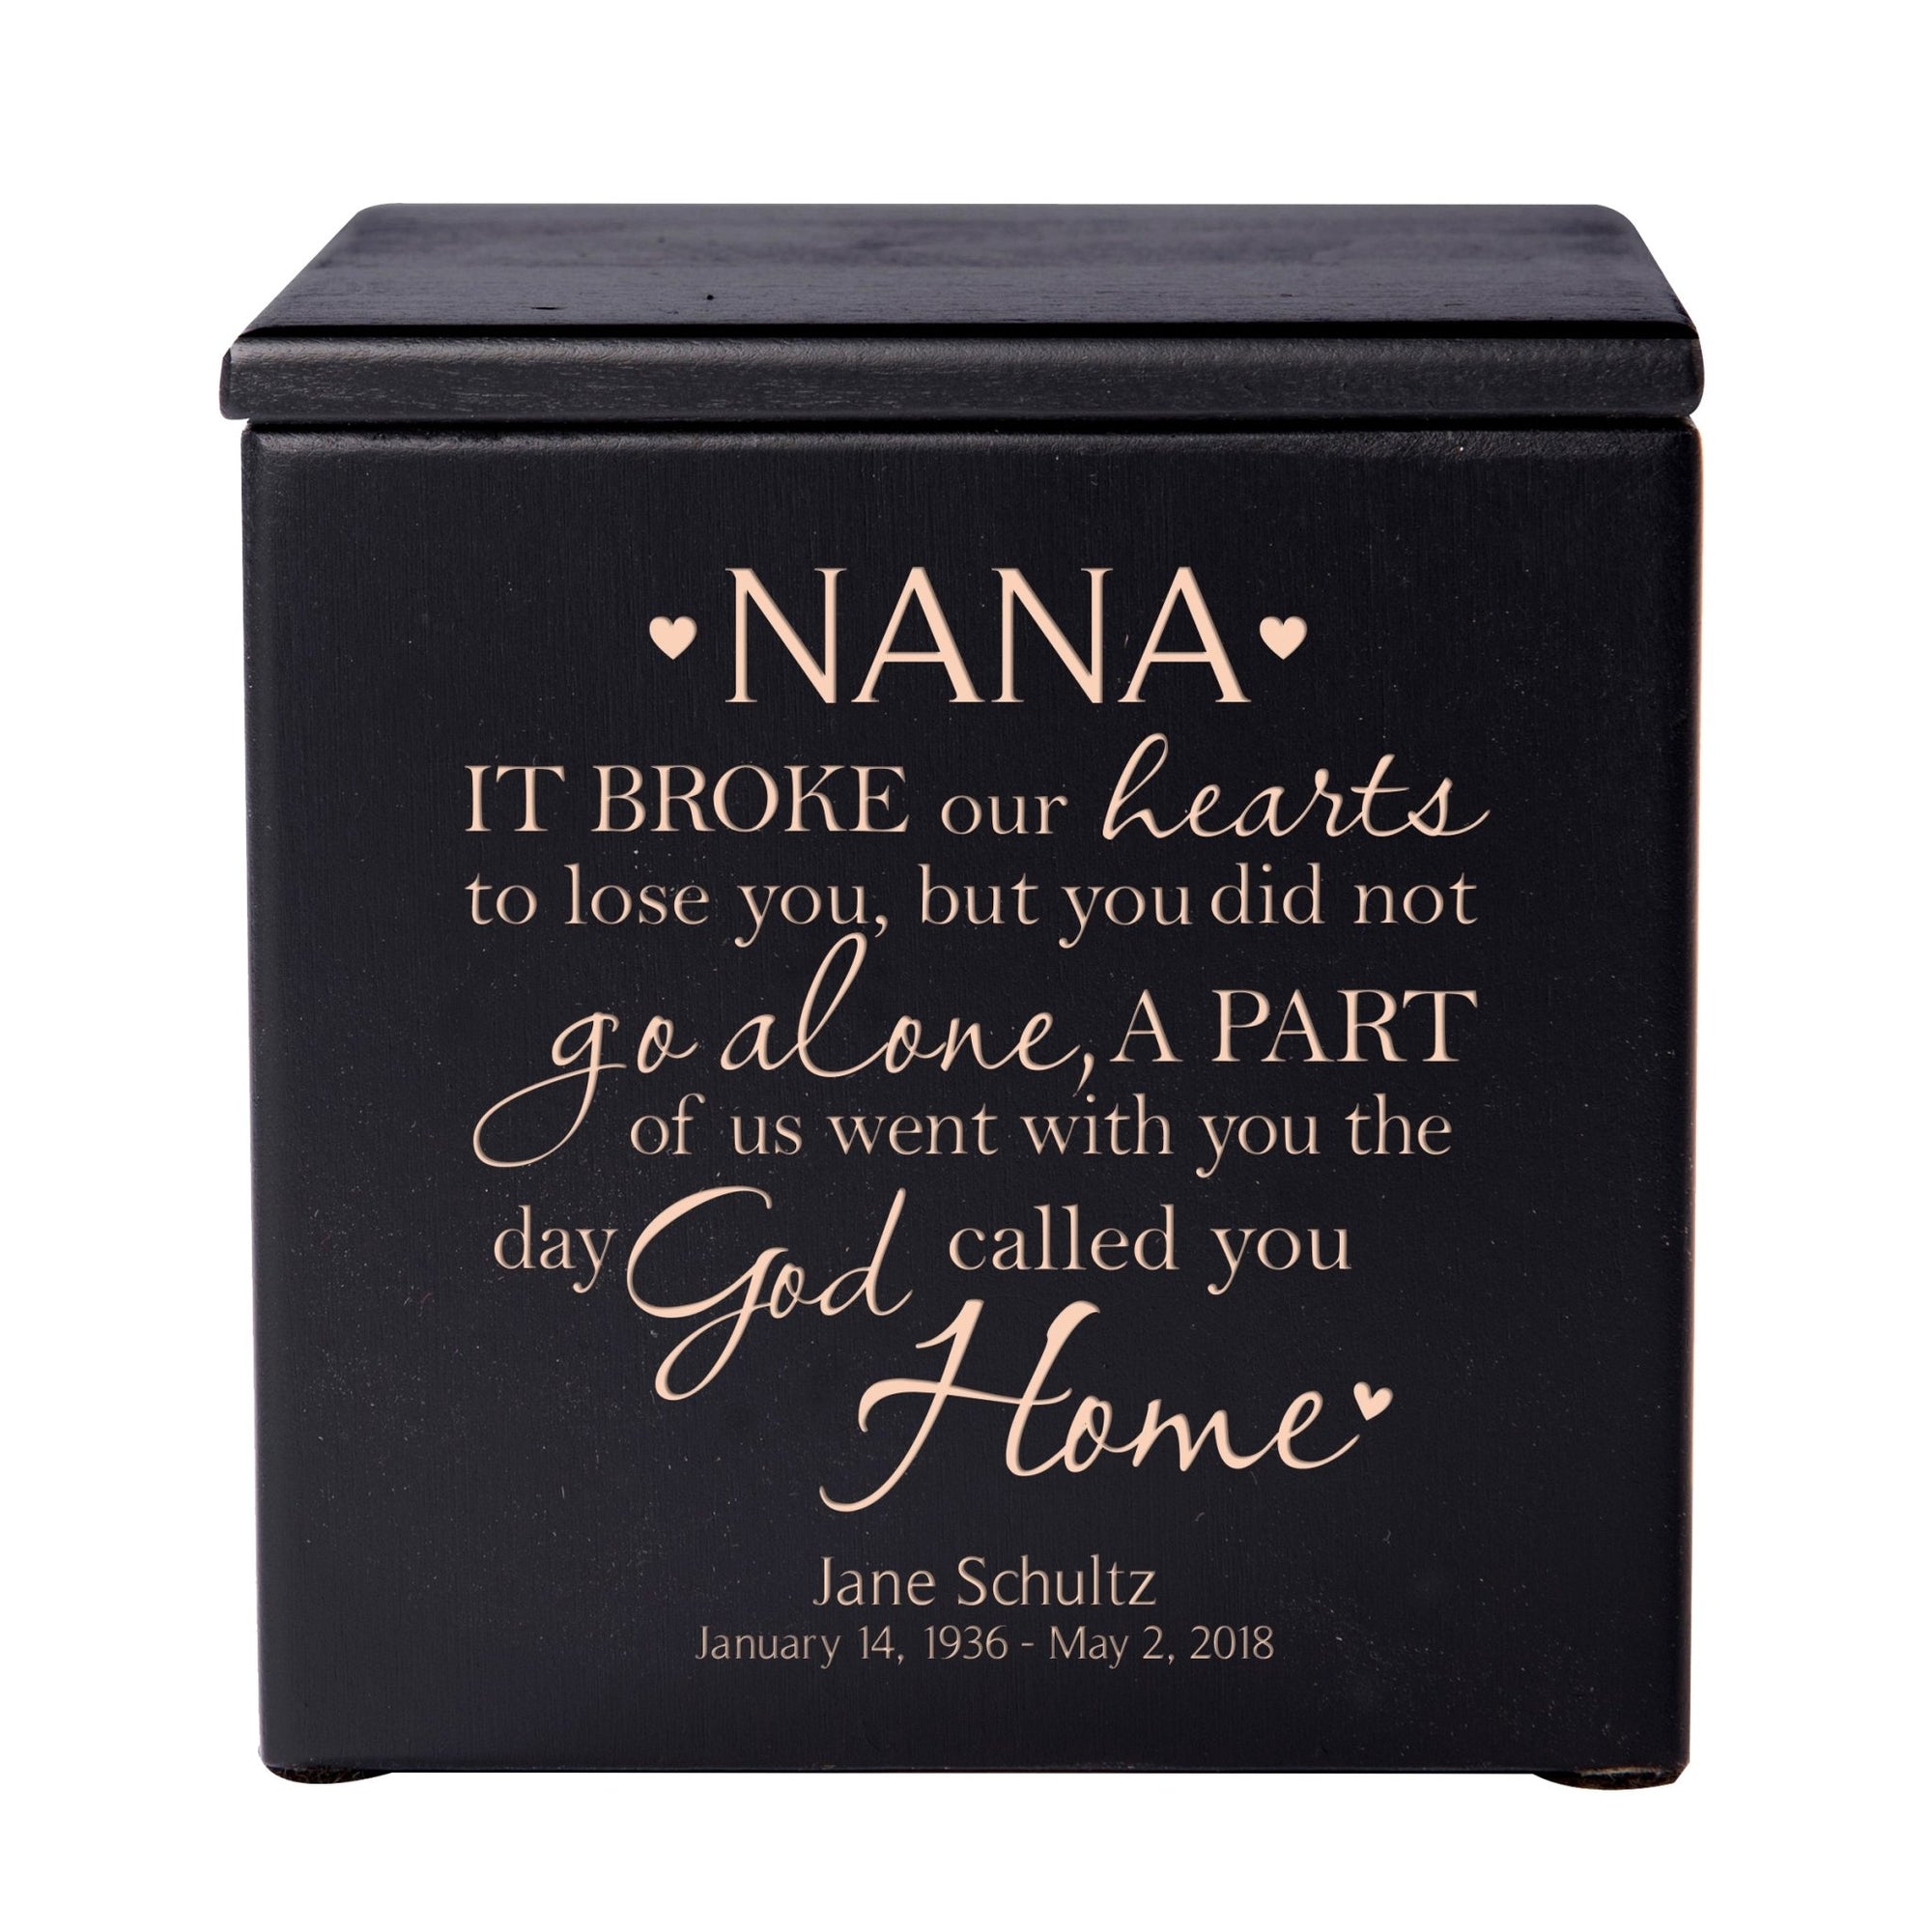 Custom Engraved Memorial Cremation Urn Box Holds 49 Cu Inches Of Human Ashes (It Broke Our Hearts Nana) Funeral and Condolence Keepsake - LifeSong Milestones